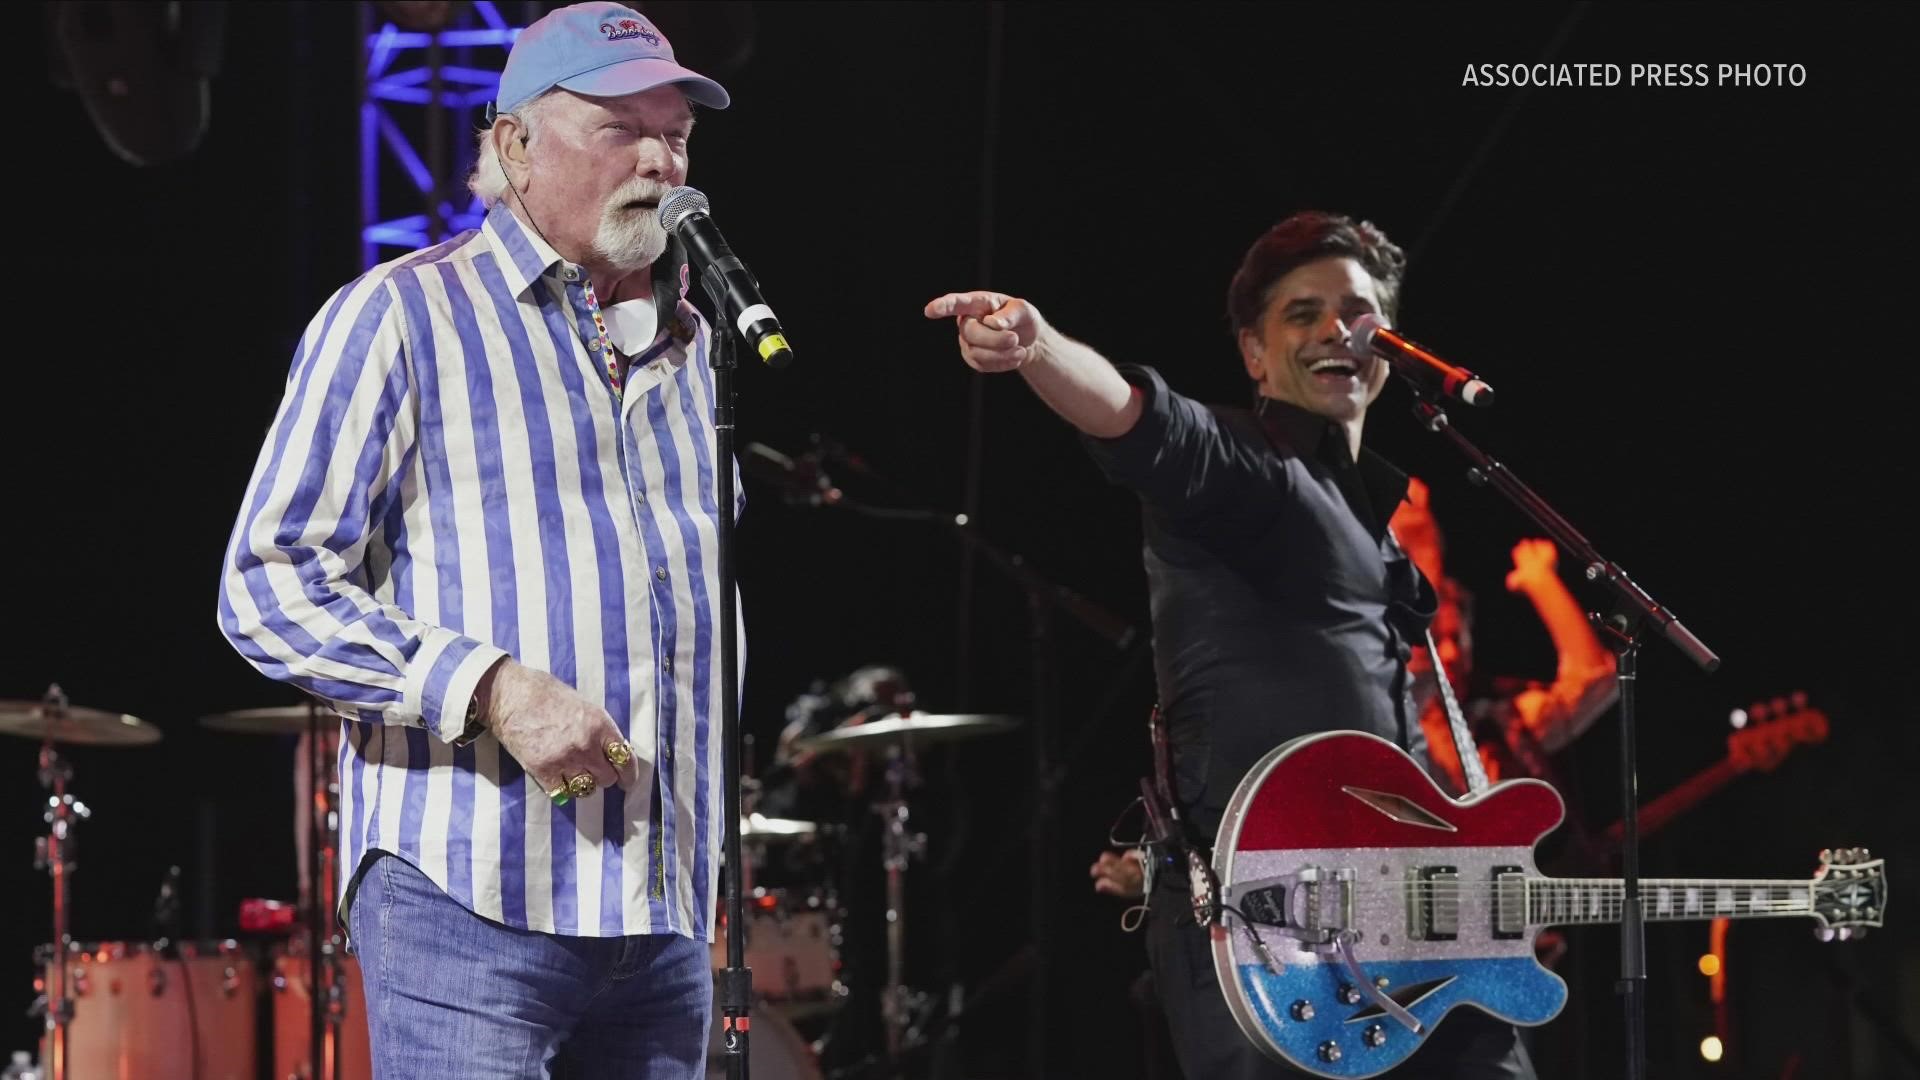 The Beach Boys will be coming to Buffalo